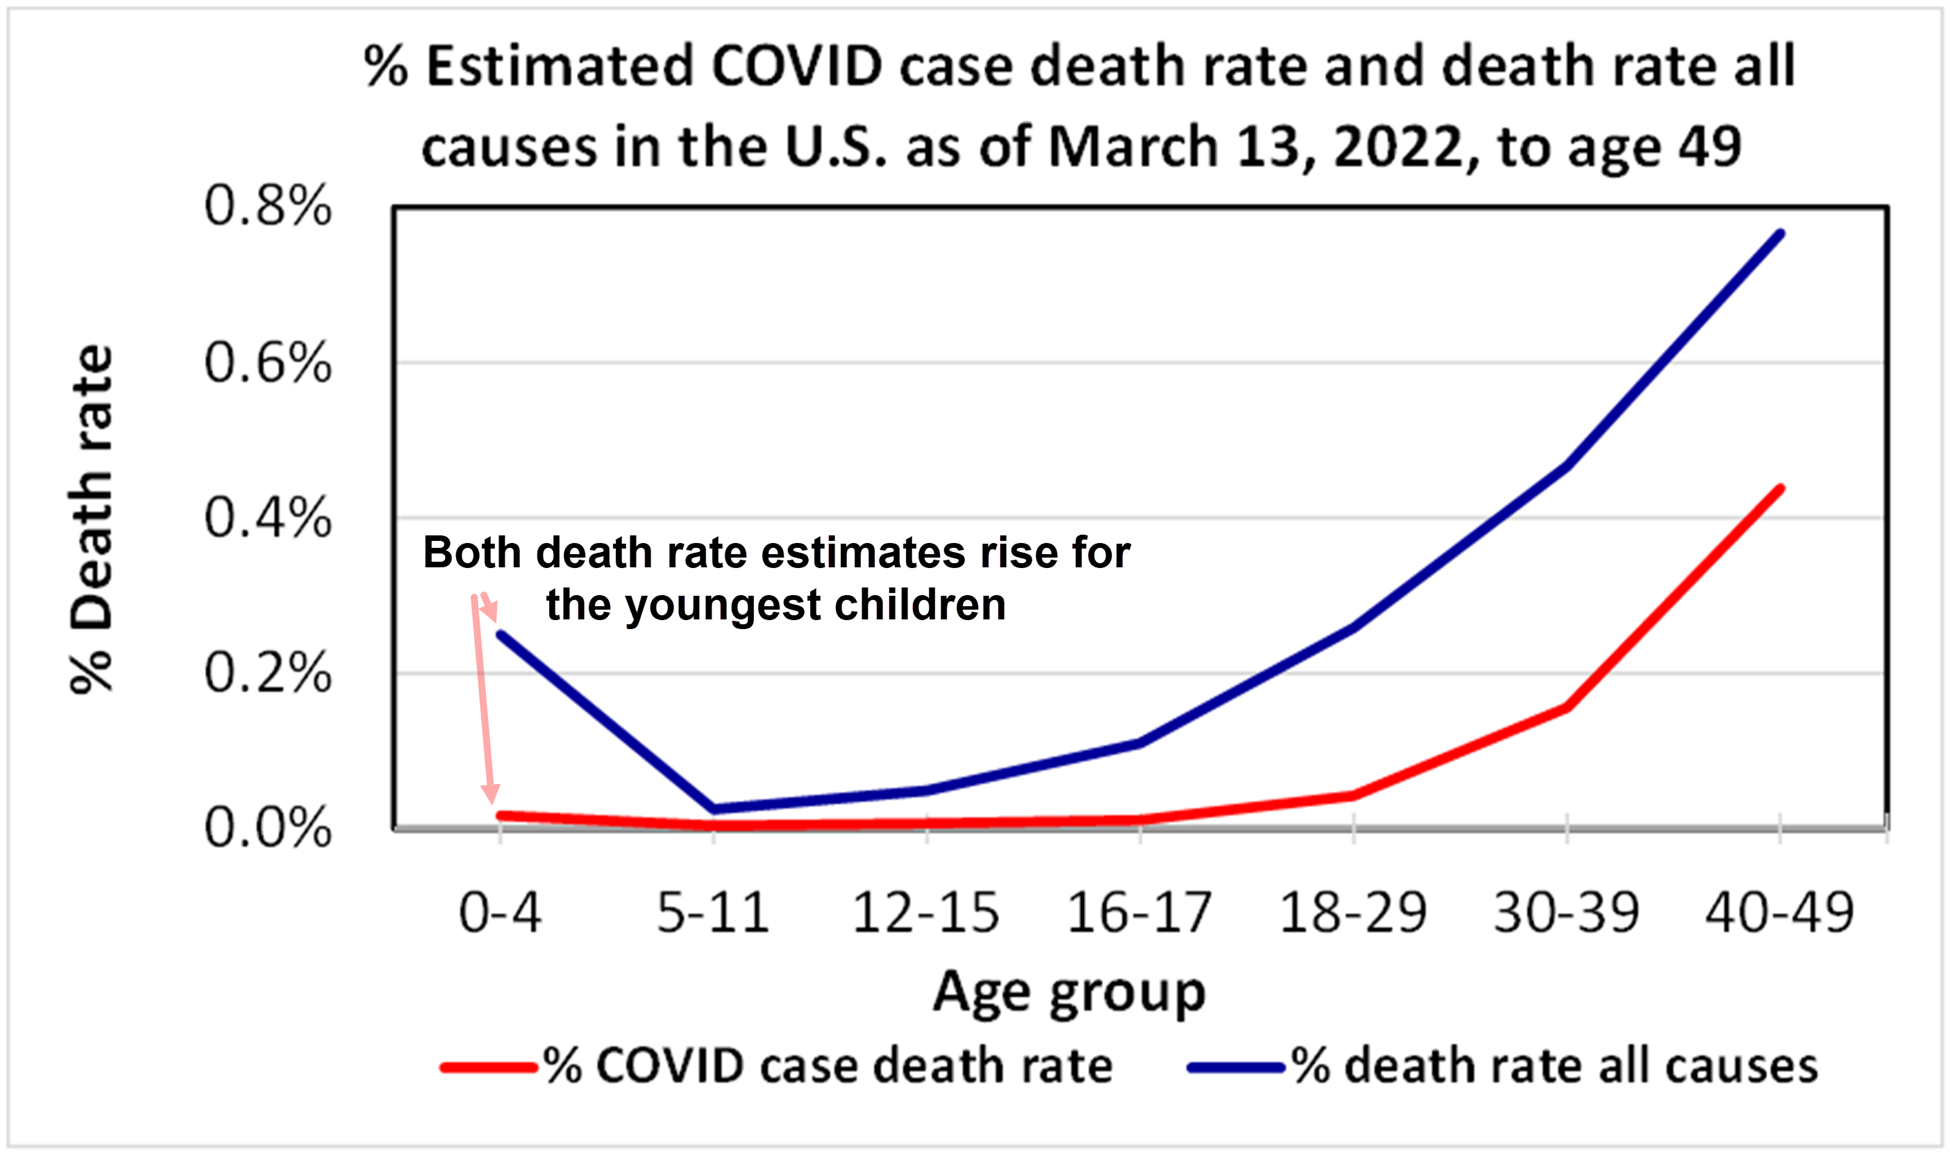 COVID-19’s impact on young children and the question of whether to vaccinate